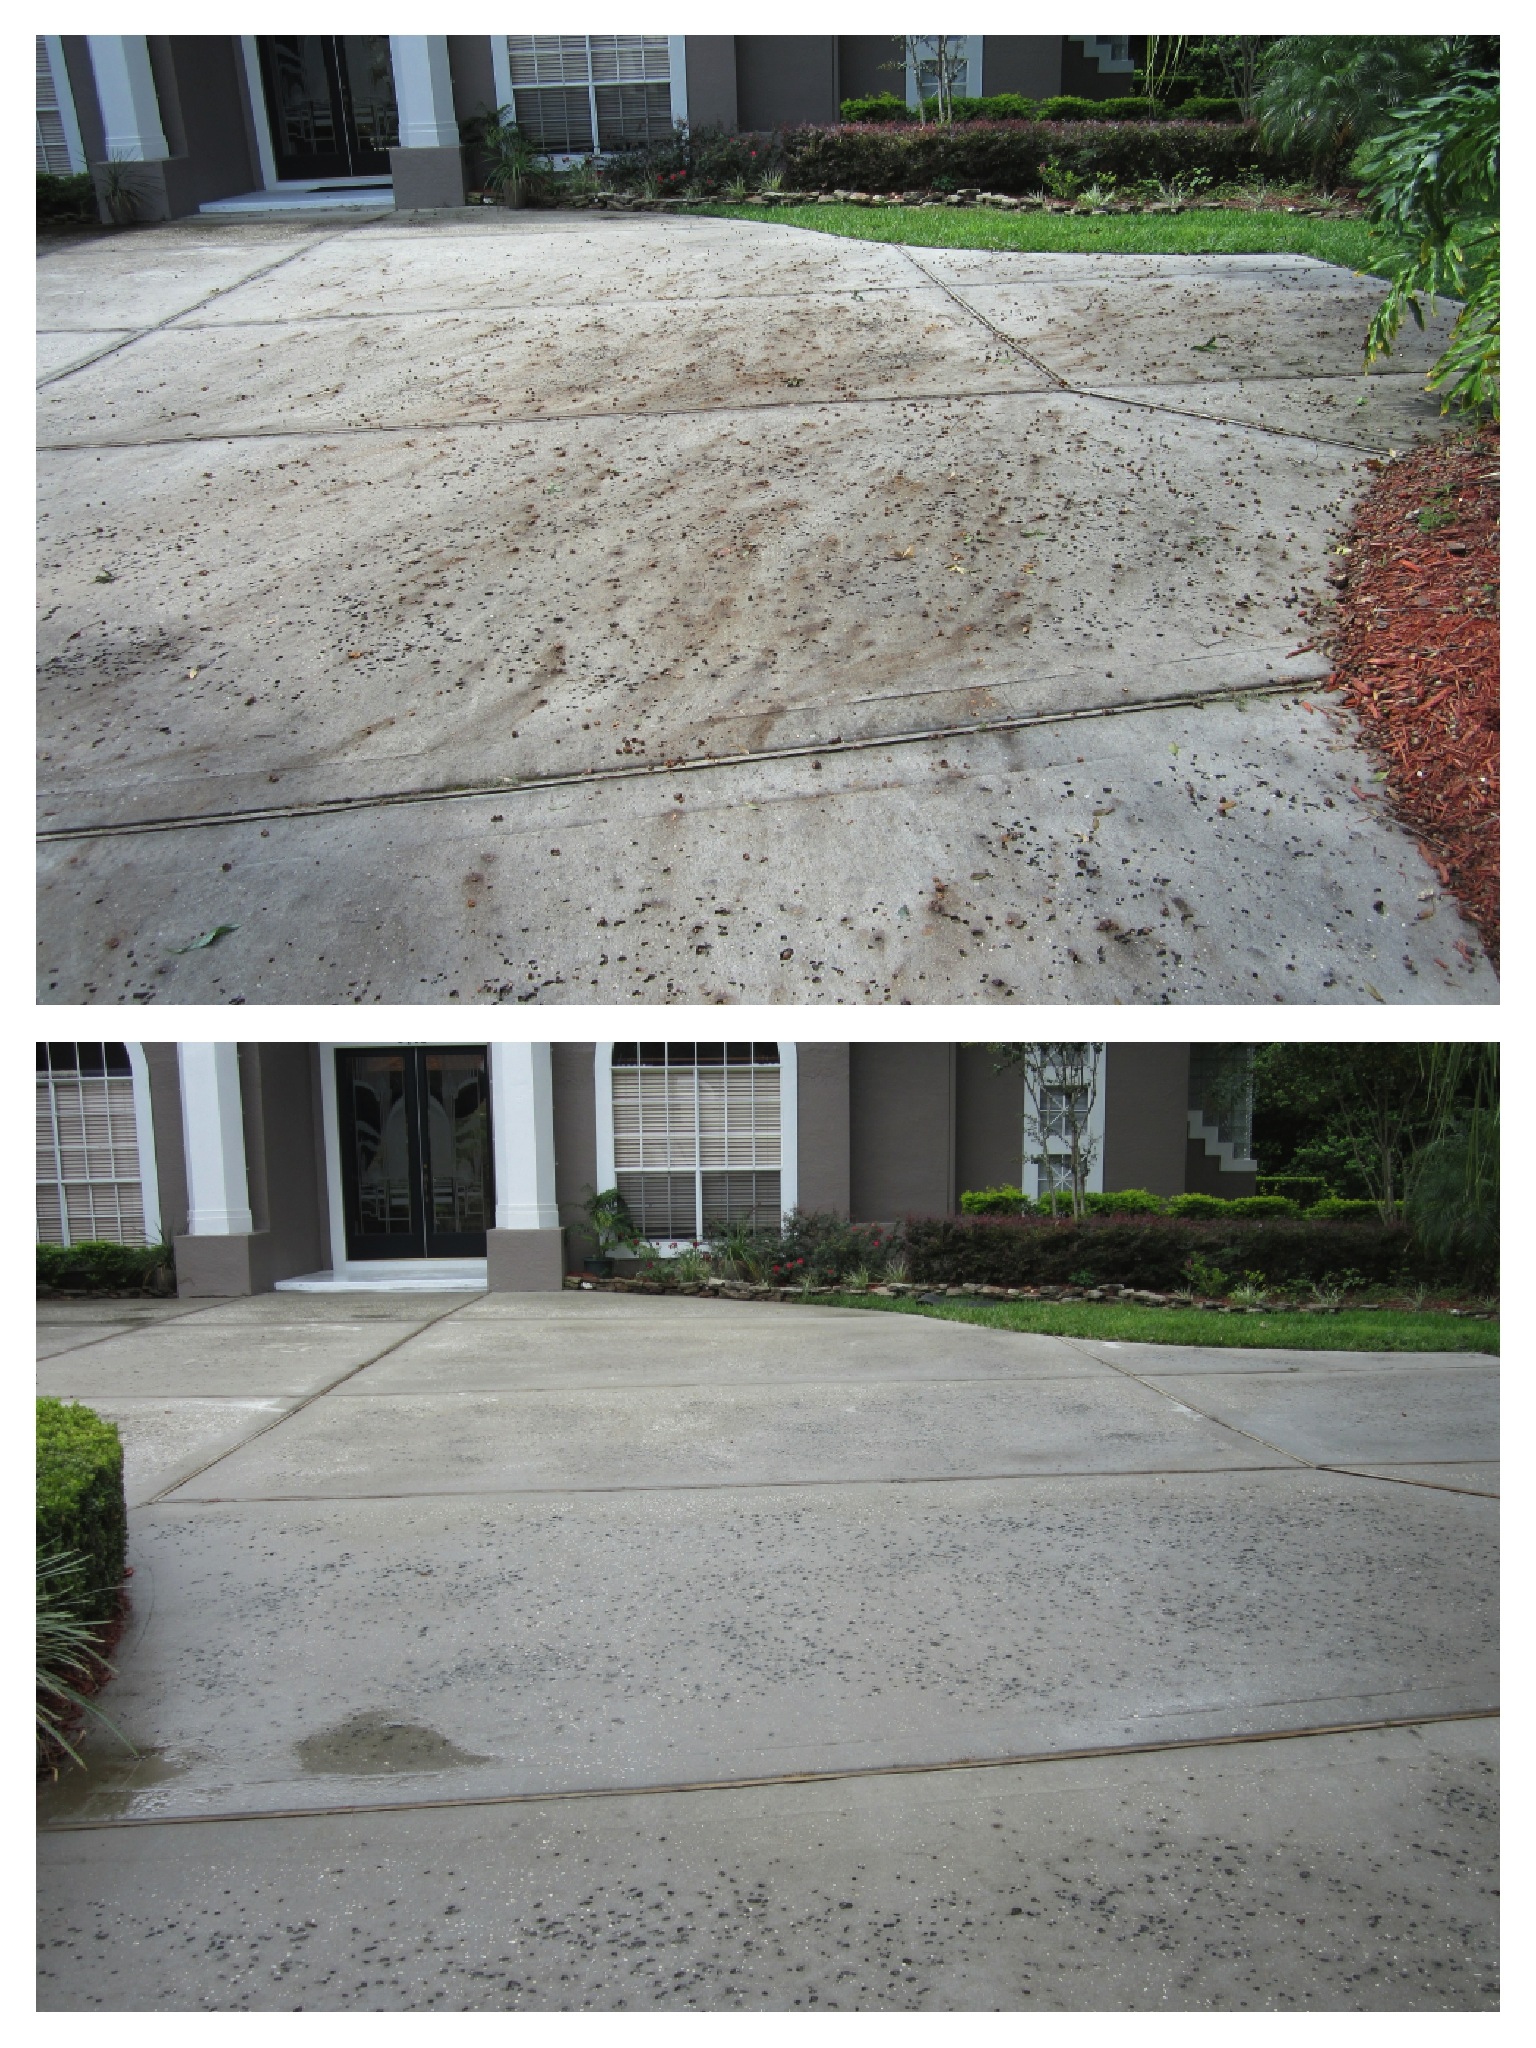 Acorn Stains On Driveway And Concrete A Problem Due To A Bumper Crop Also Known As A Mast Year Wash Rite Orlando S Premier Pressure Washing Service